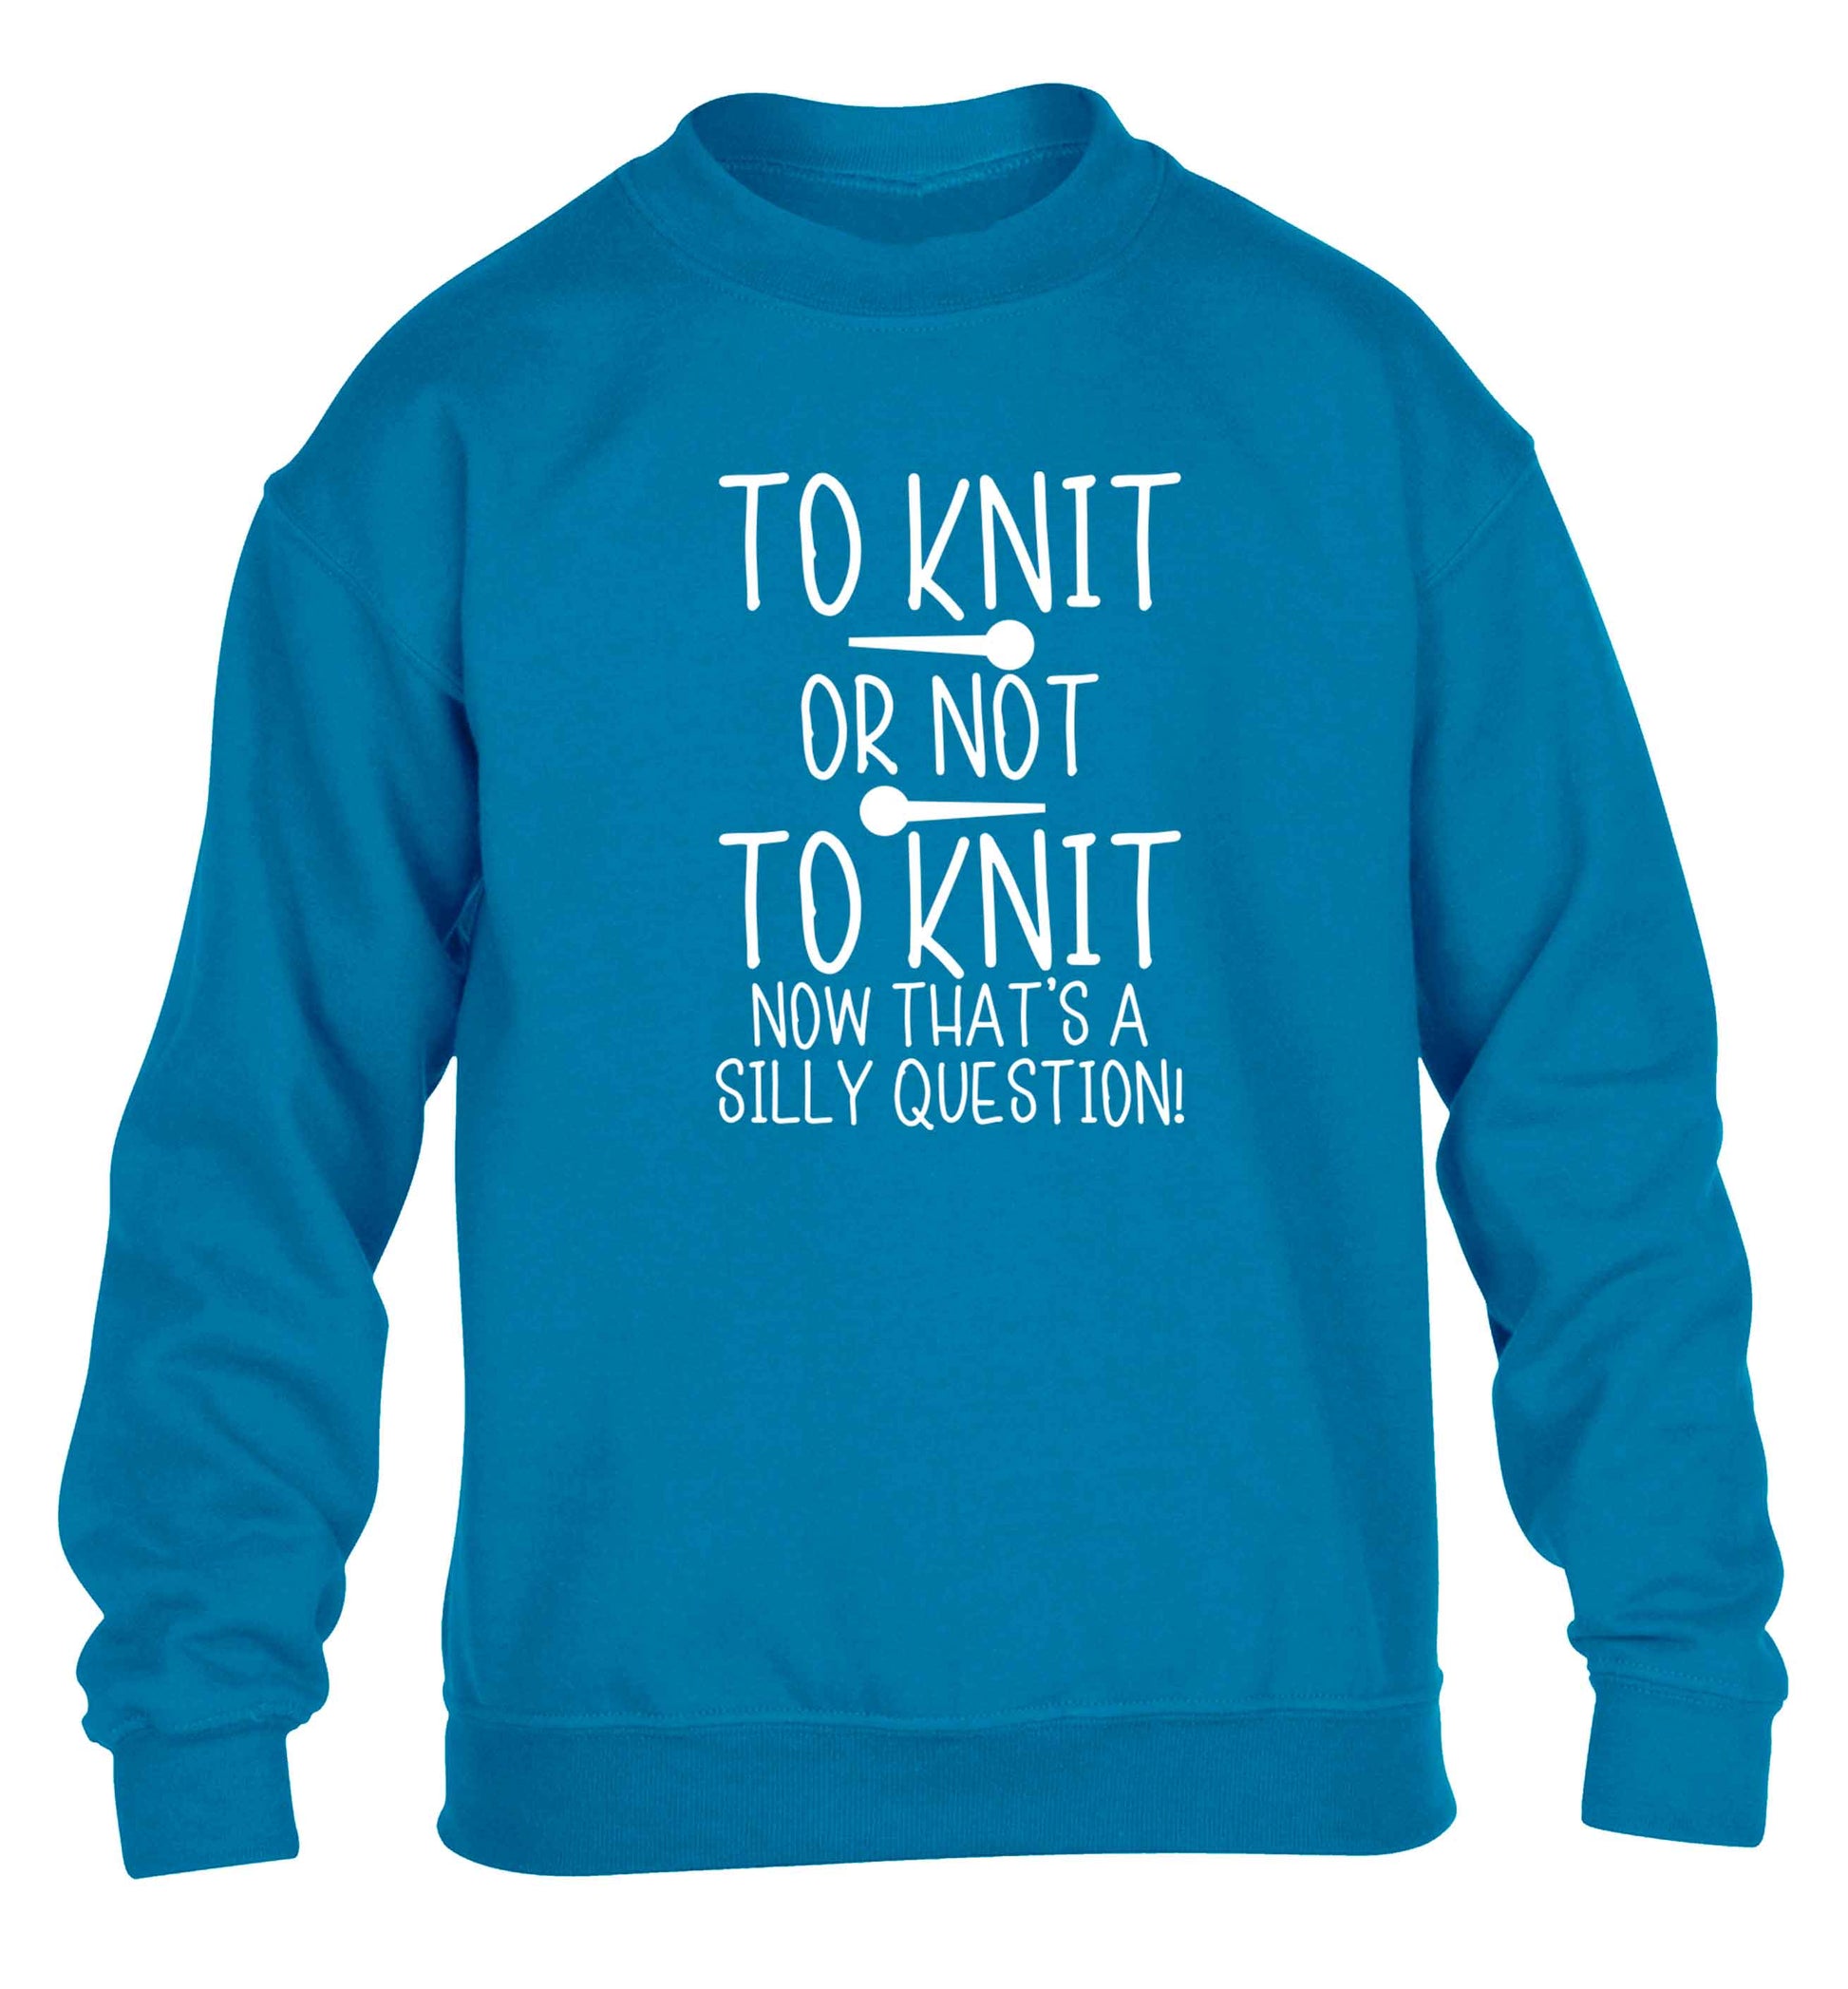 To knit or not to knit now that's a silly question children's blue sweater 12-13 Years